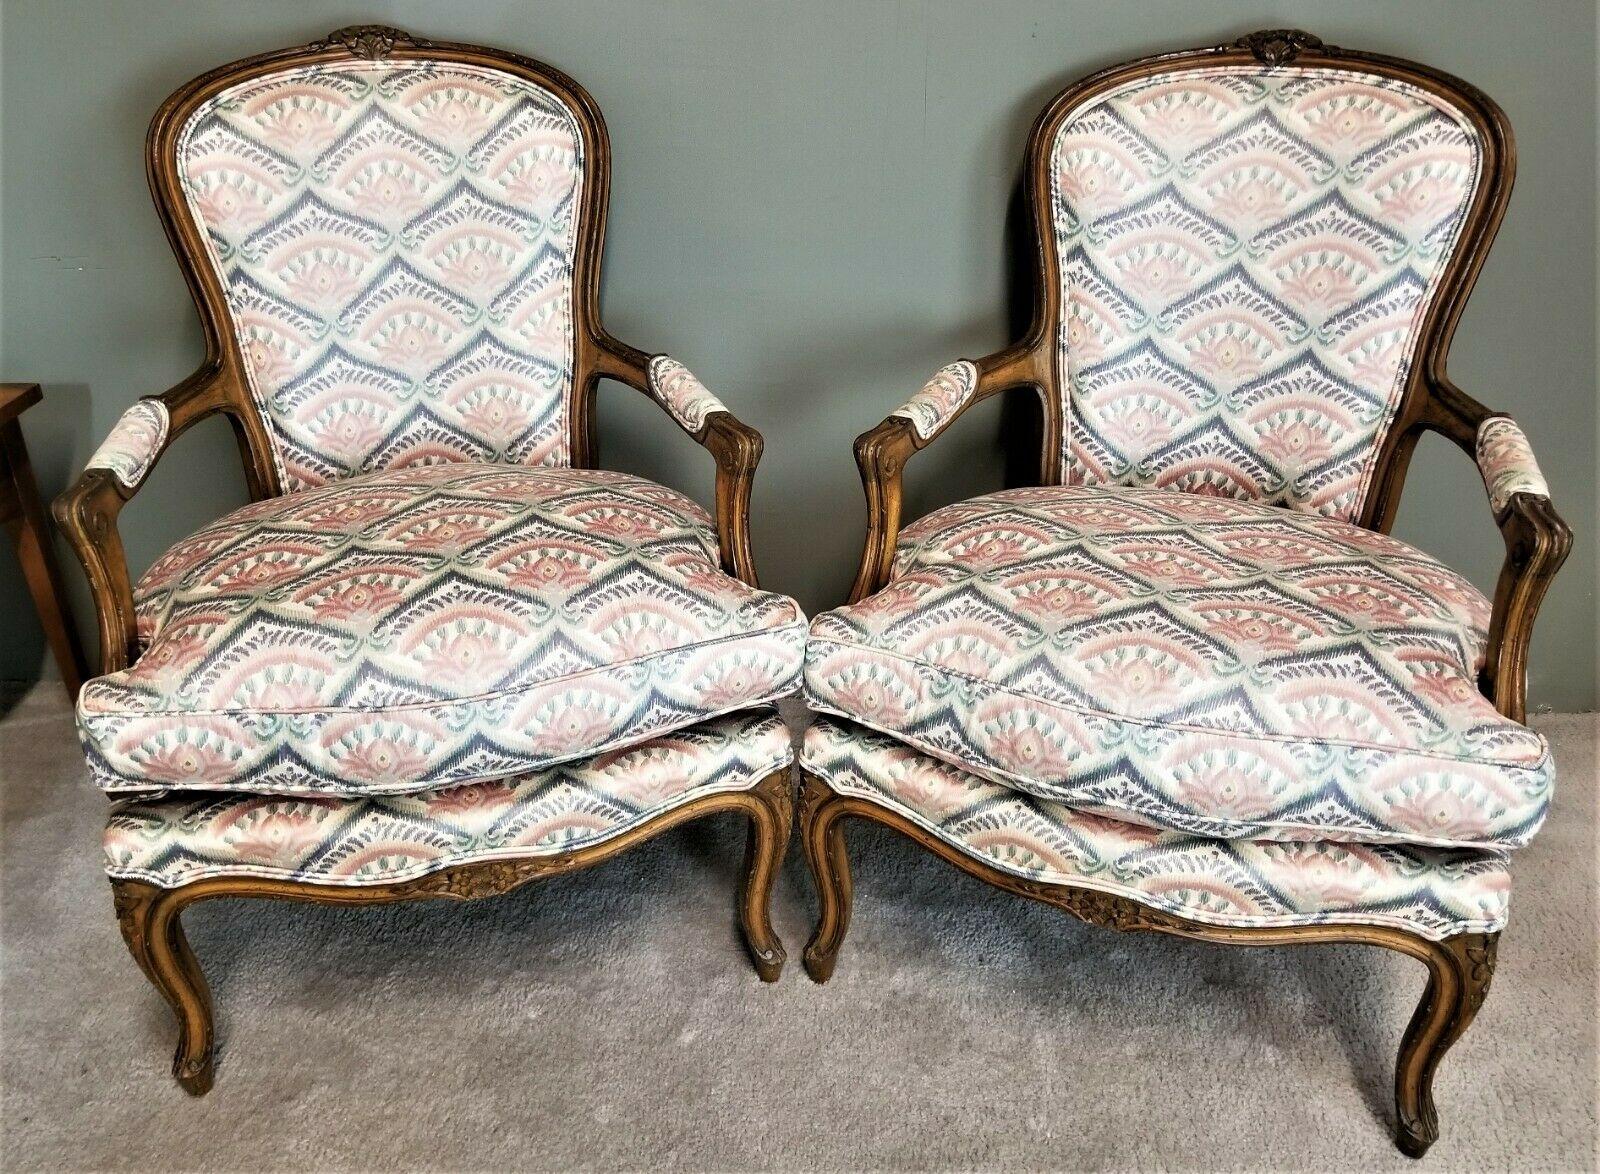 Offering One Of Our Recent Palm Beach Estate Fine Furniture Acquisitions Of A 
Beautiful Pair of Vintage French Provincial Louis XV Hand-Carved Wood Fauteuil Armchairs

With spring-supported seats, and hand-carved accents.

Approximate Measurements